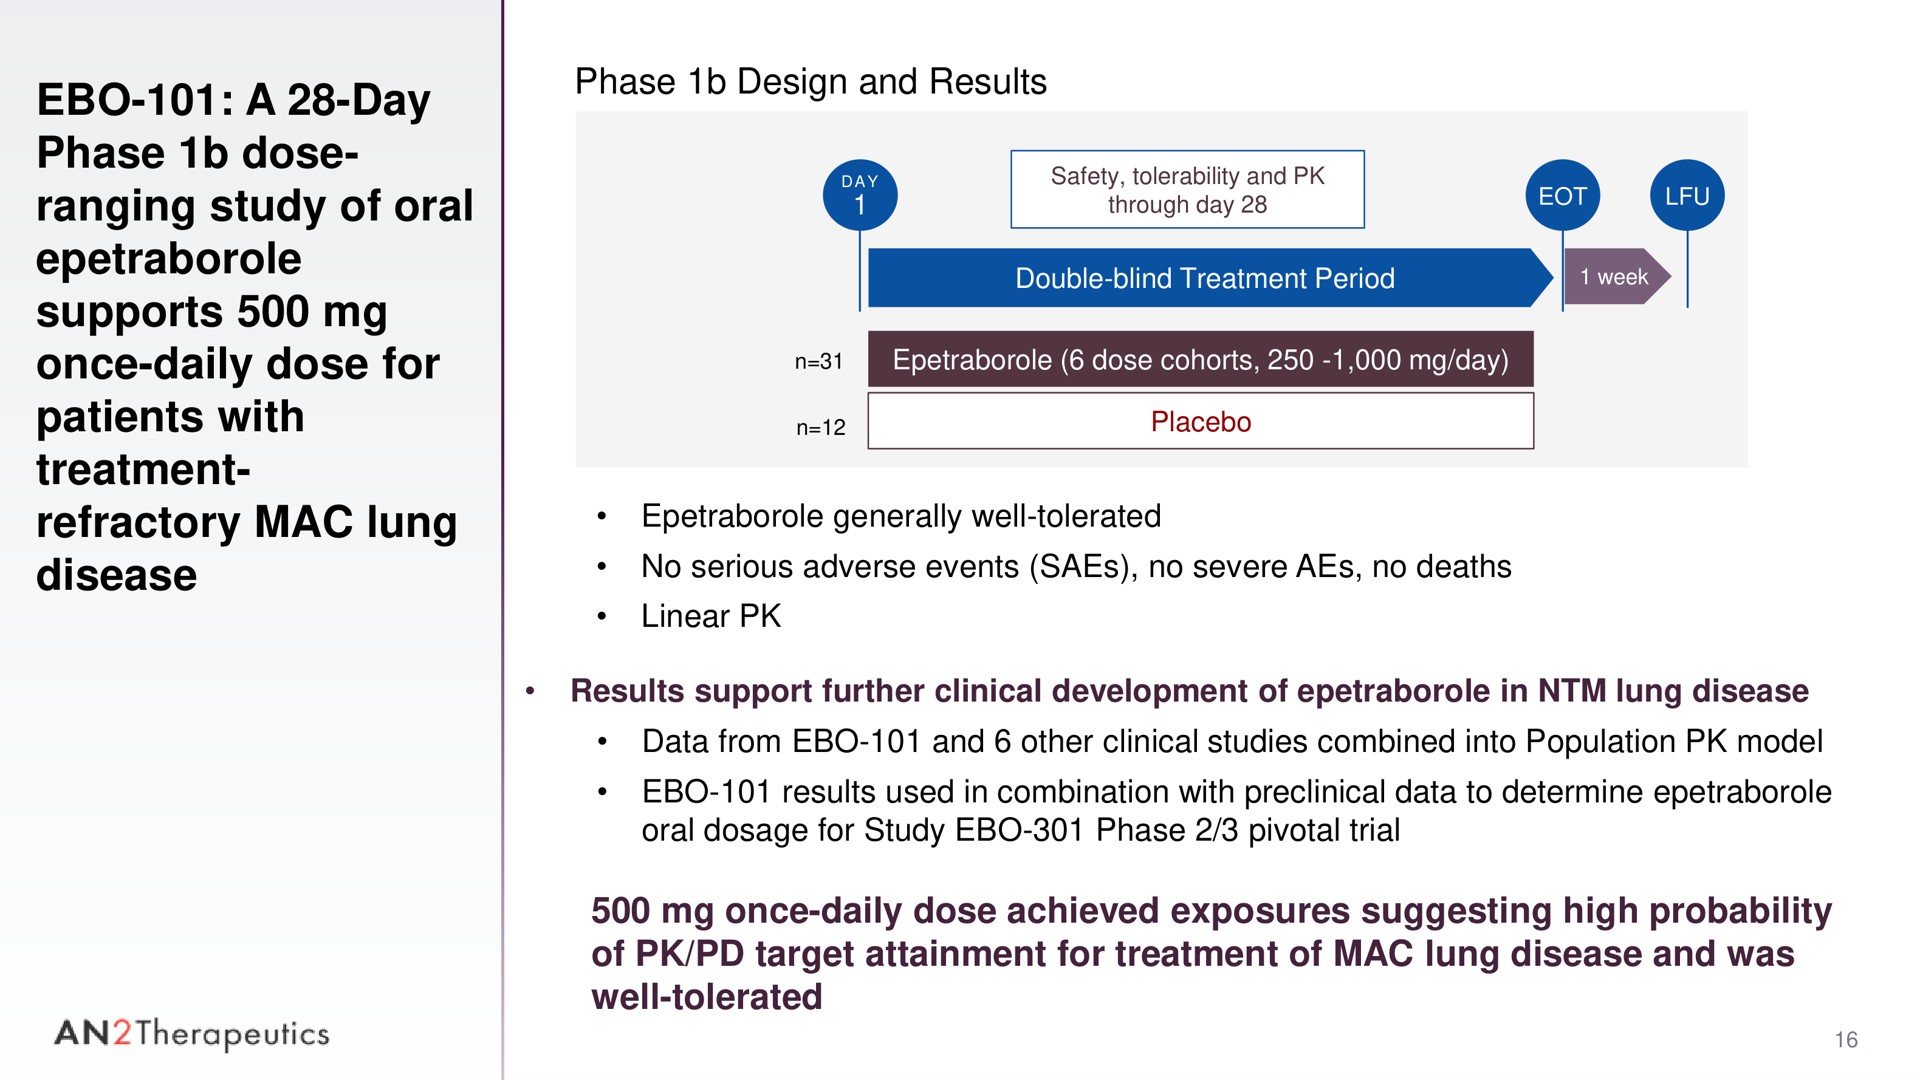 a day phase dose ranging study of oral supports once daily dose for patients with treatment refractory mac lung disease phase design and results once daily dose achieved exposures suggesting high probability of target attainment for treatment of mac lung disease and was well tolerated through day so i generally an therapeutics | AN2 Therapeutics